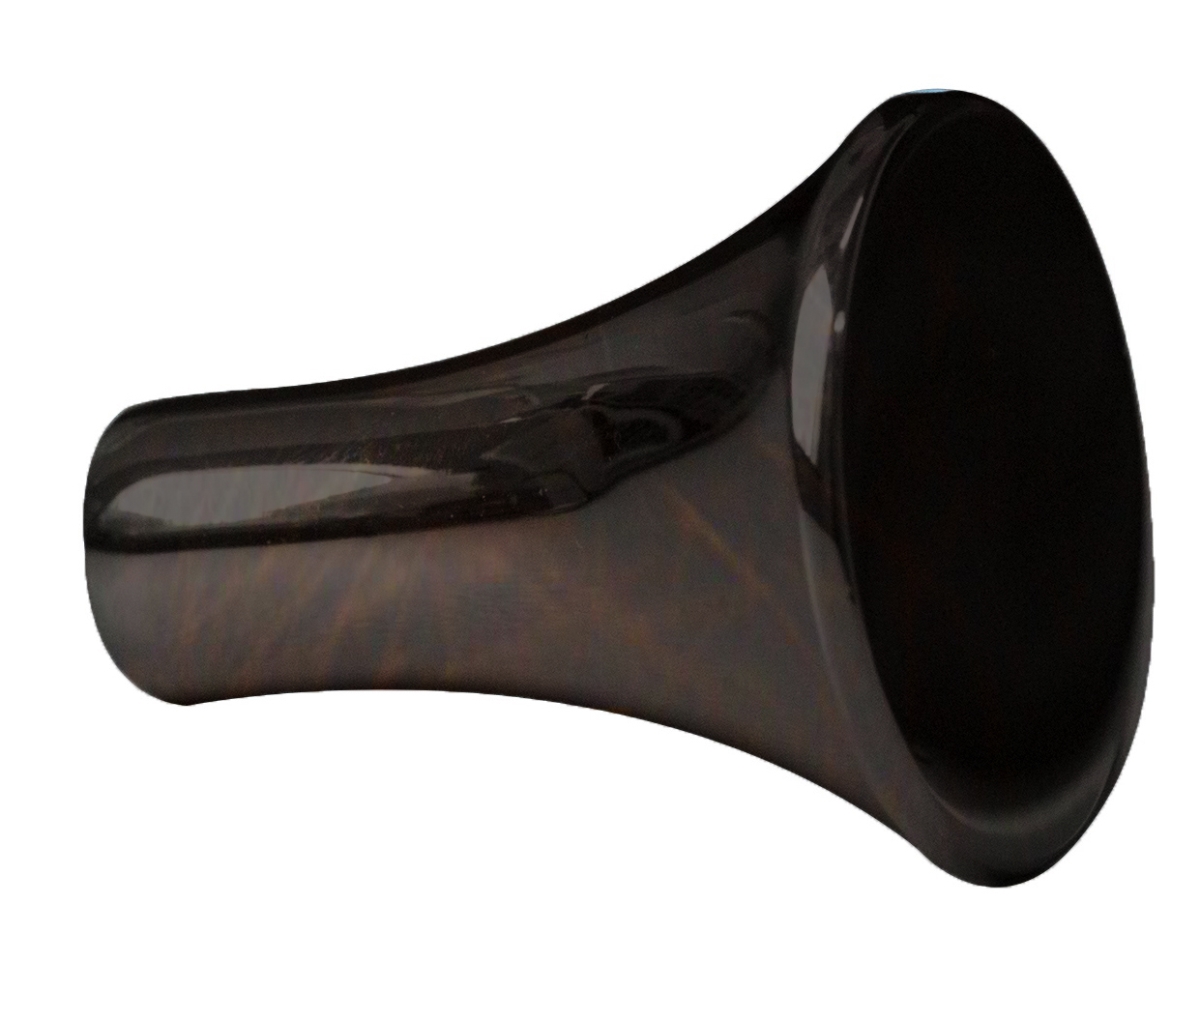 Ai-21420 1 In. Round Stainless Steel Cabinet Knob, Oil Rubbed Bronze